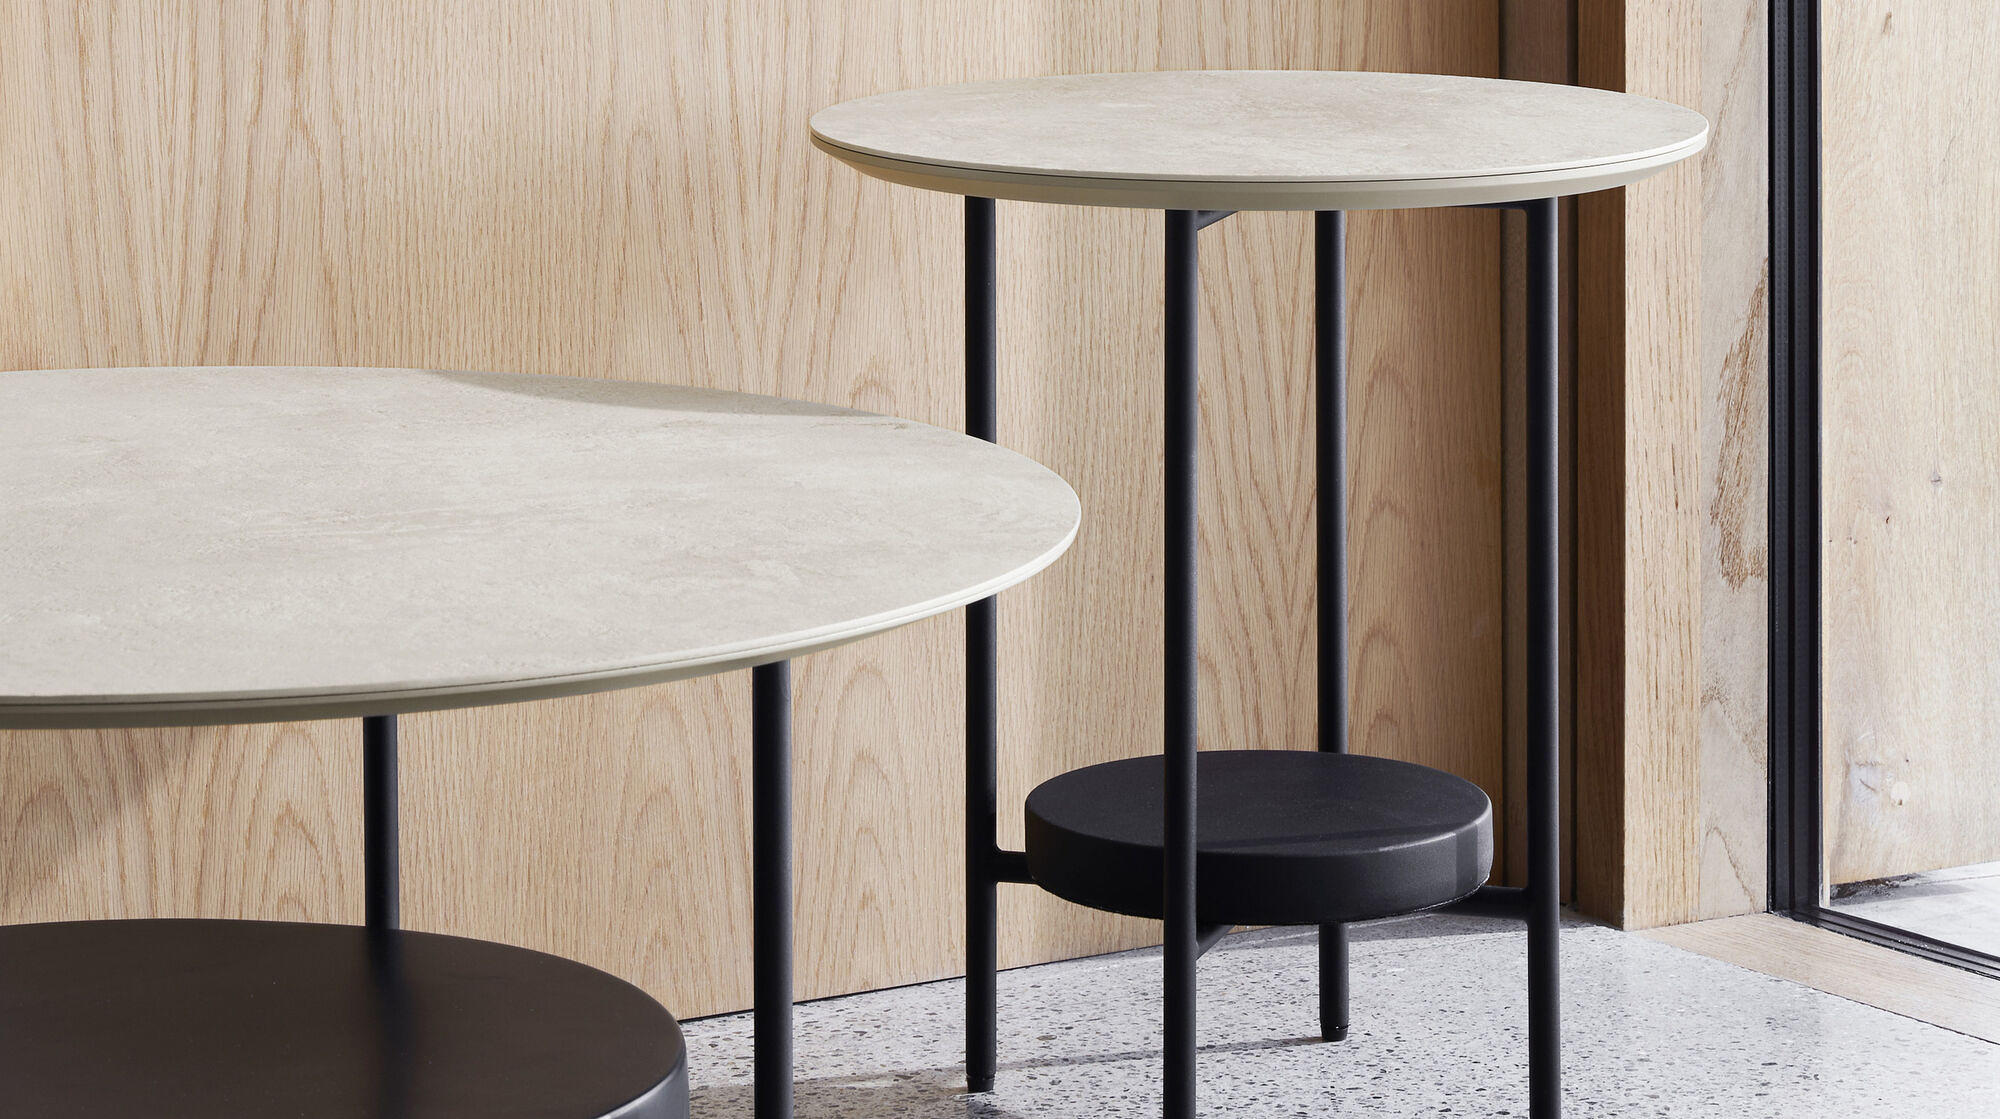 Madrid Coffee Tables by Morten Georgsen for BoConcept